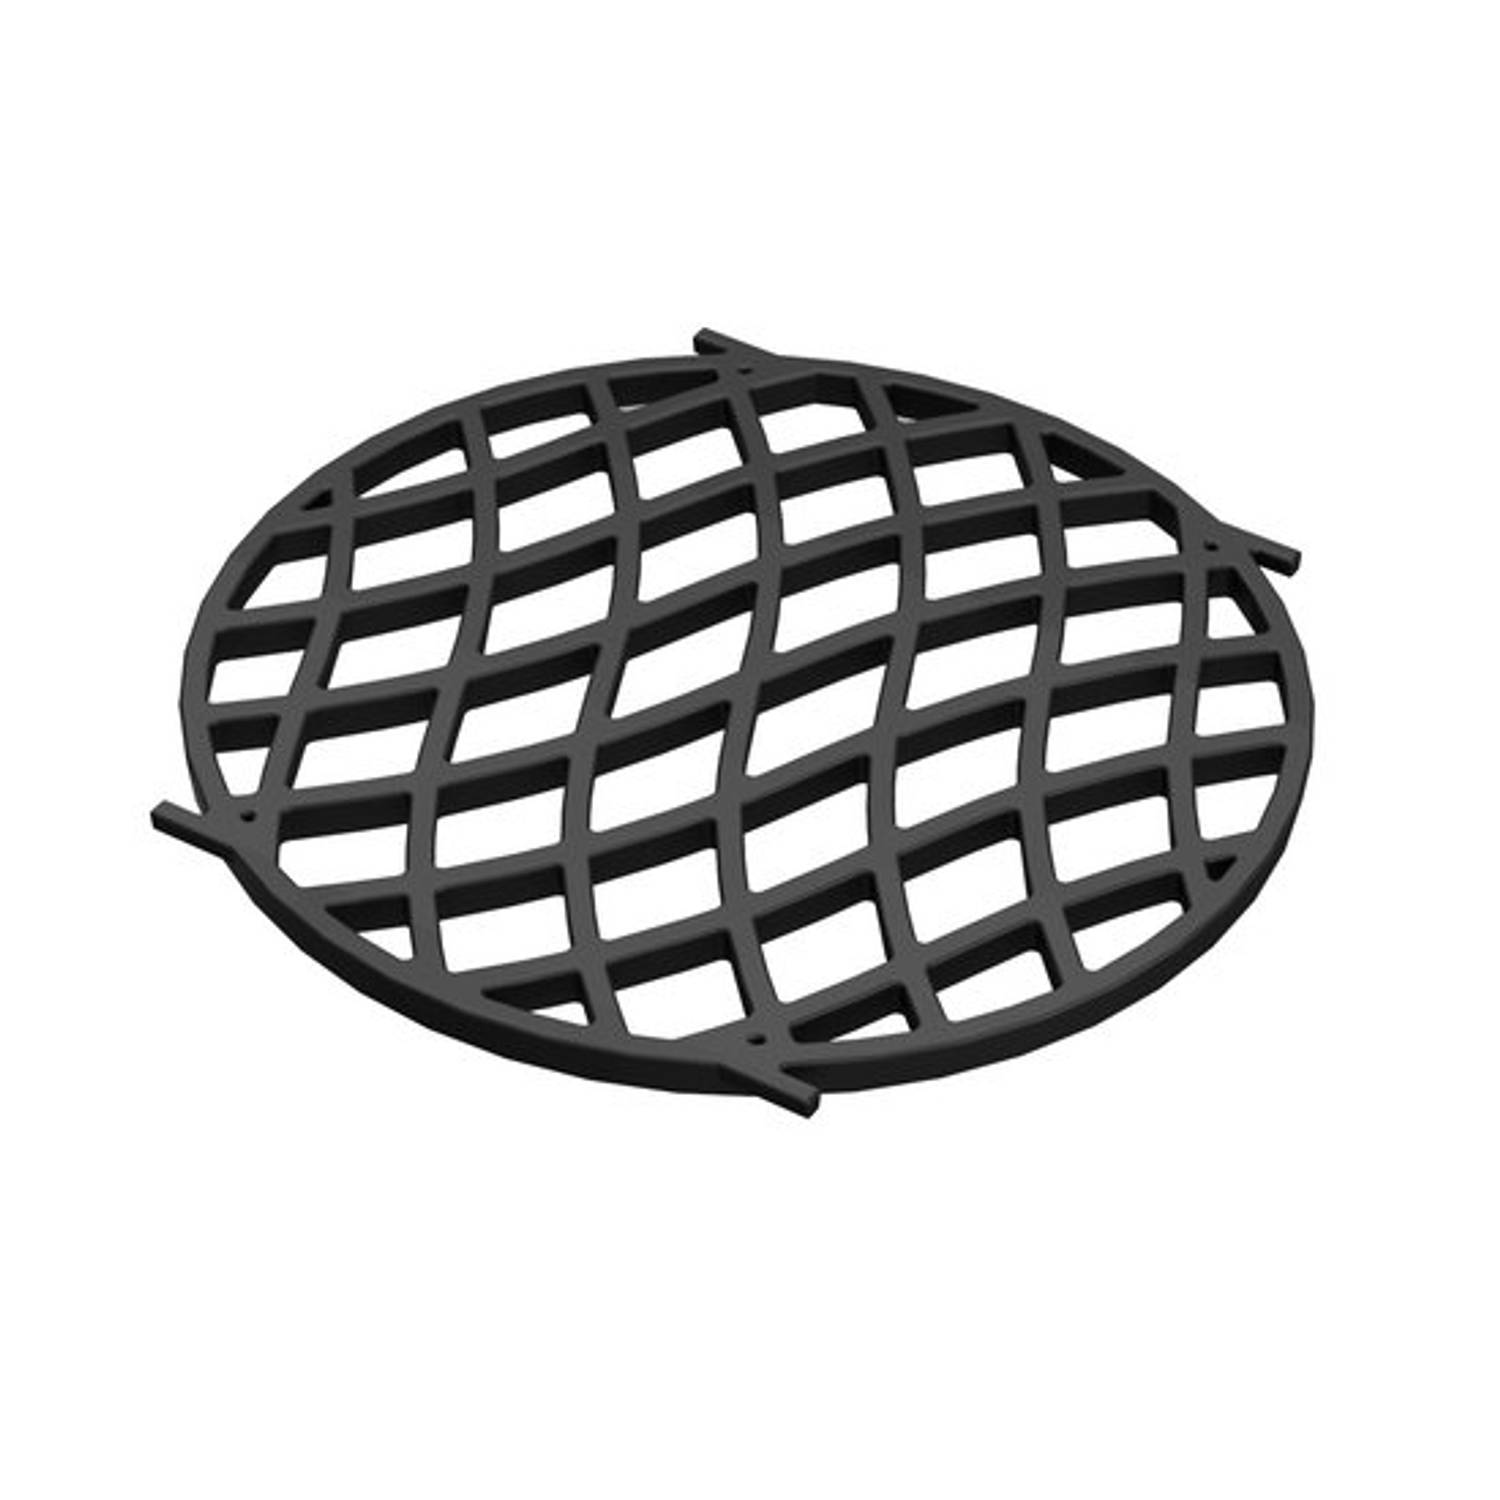 Gietijzeren &apos;Sear Grate&apos; voor gourmet bbq systeem ( past o.a. op Weber GBS systeem )